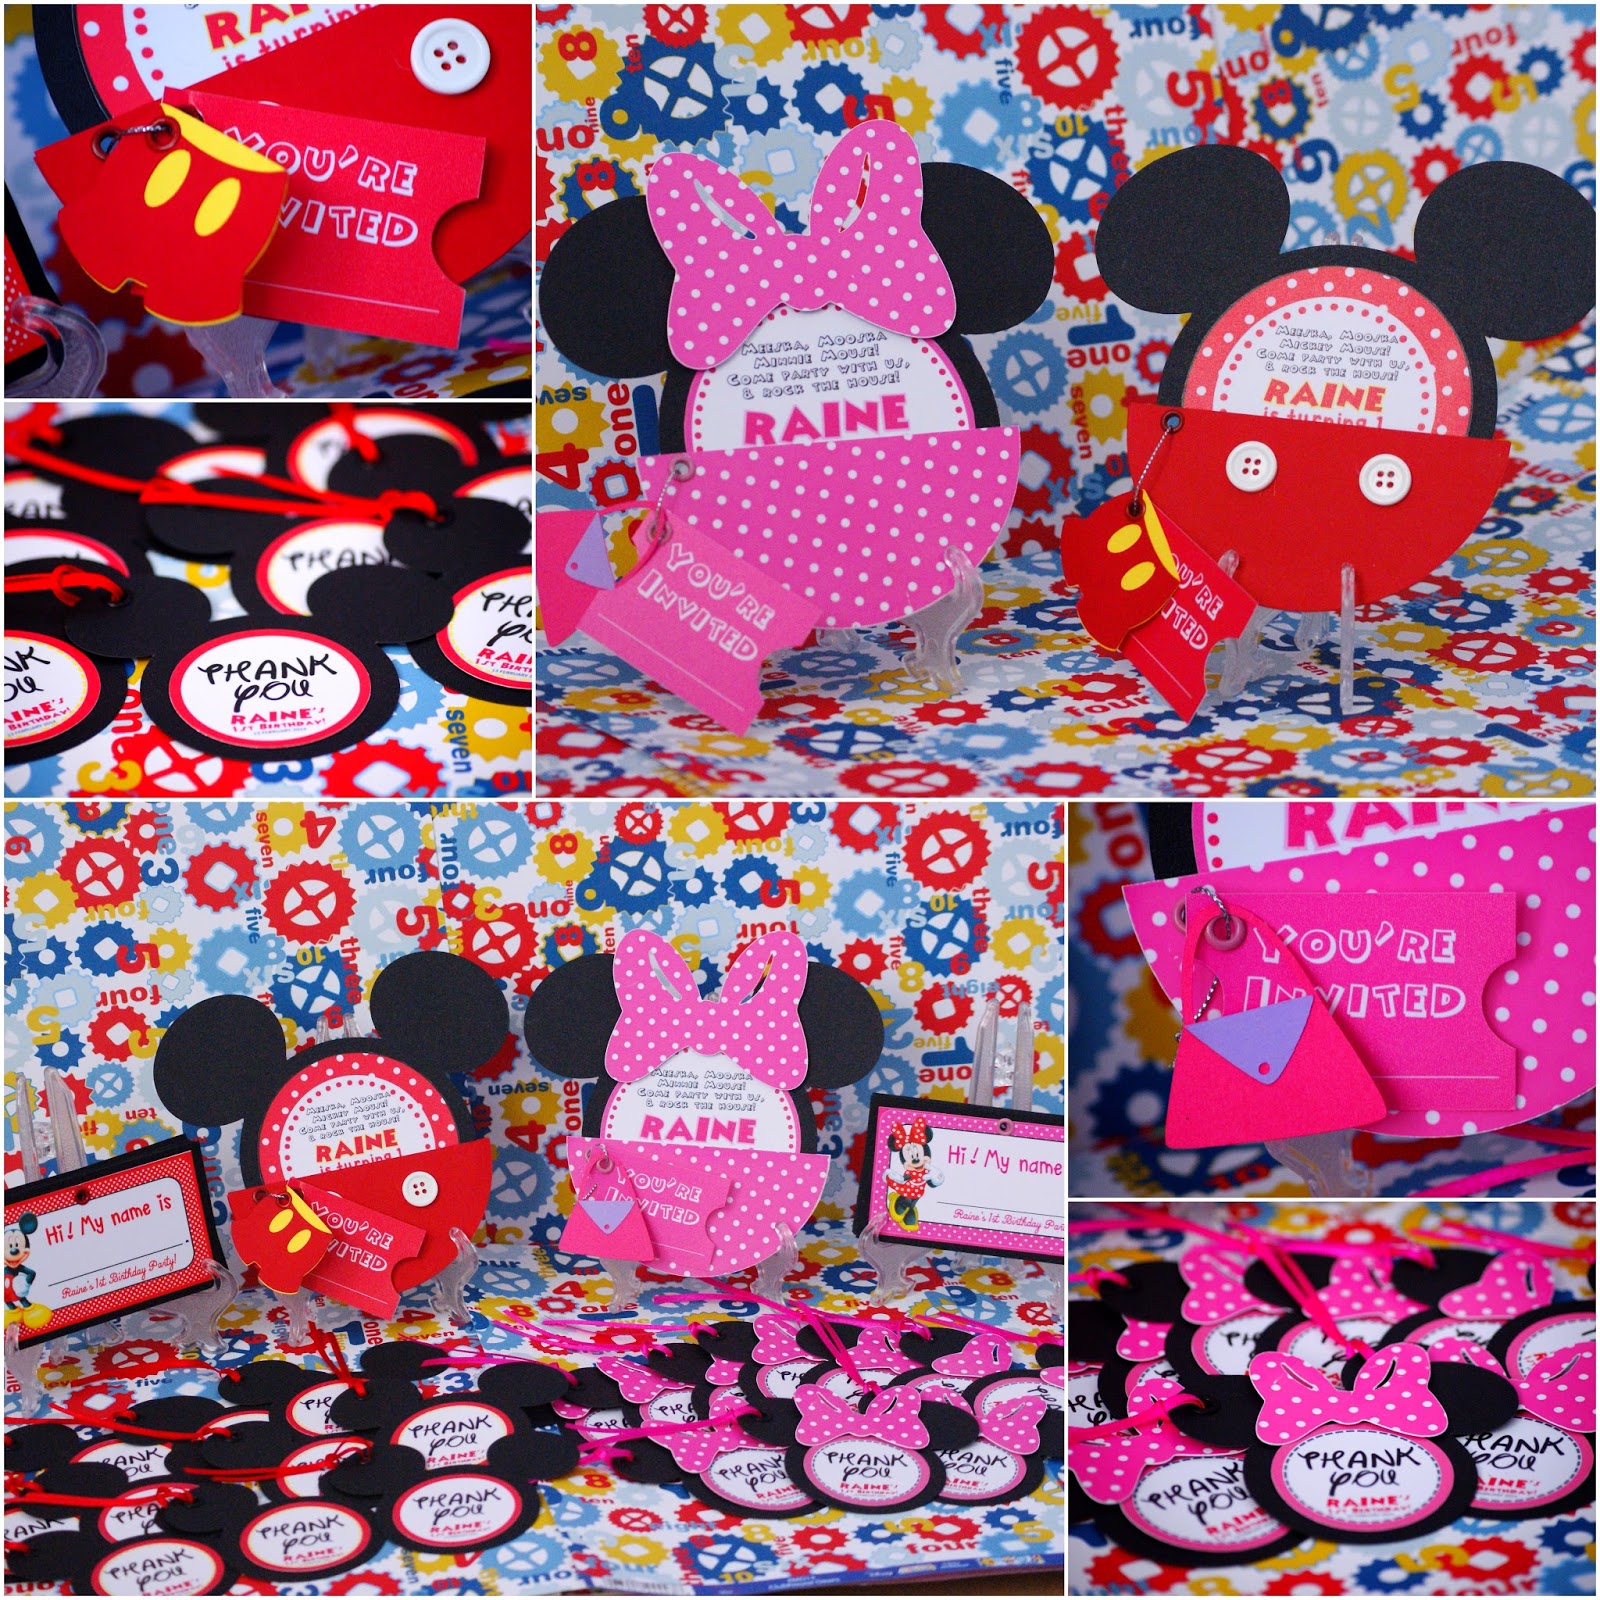 paperoo-invites-mickey-mouse-and-minnie-mouse-invitations